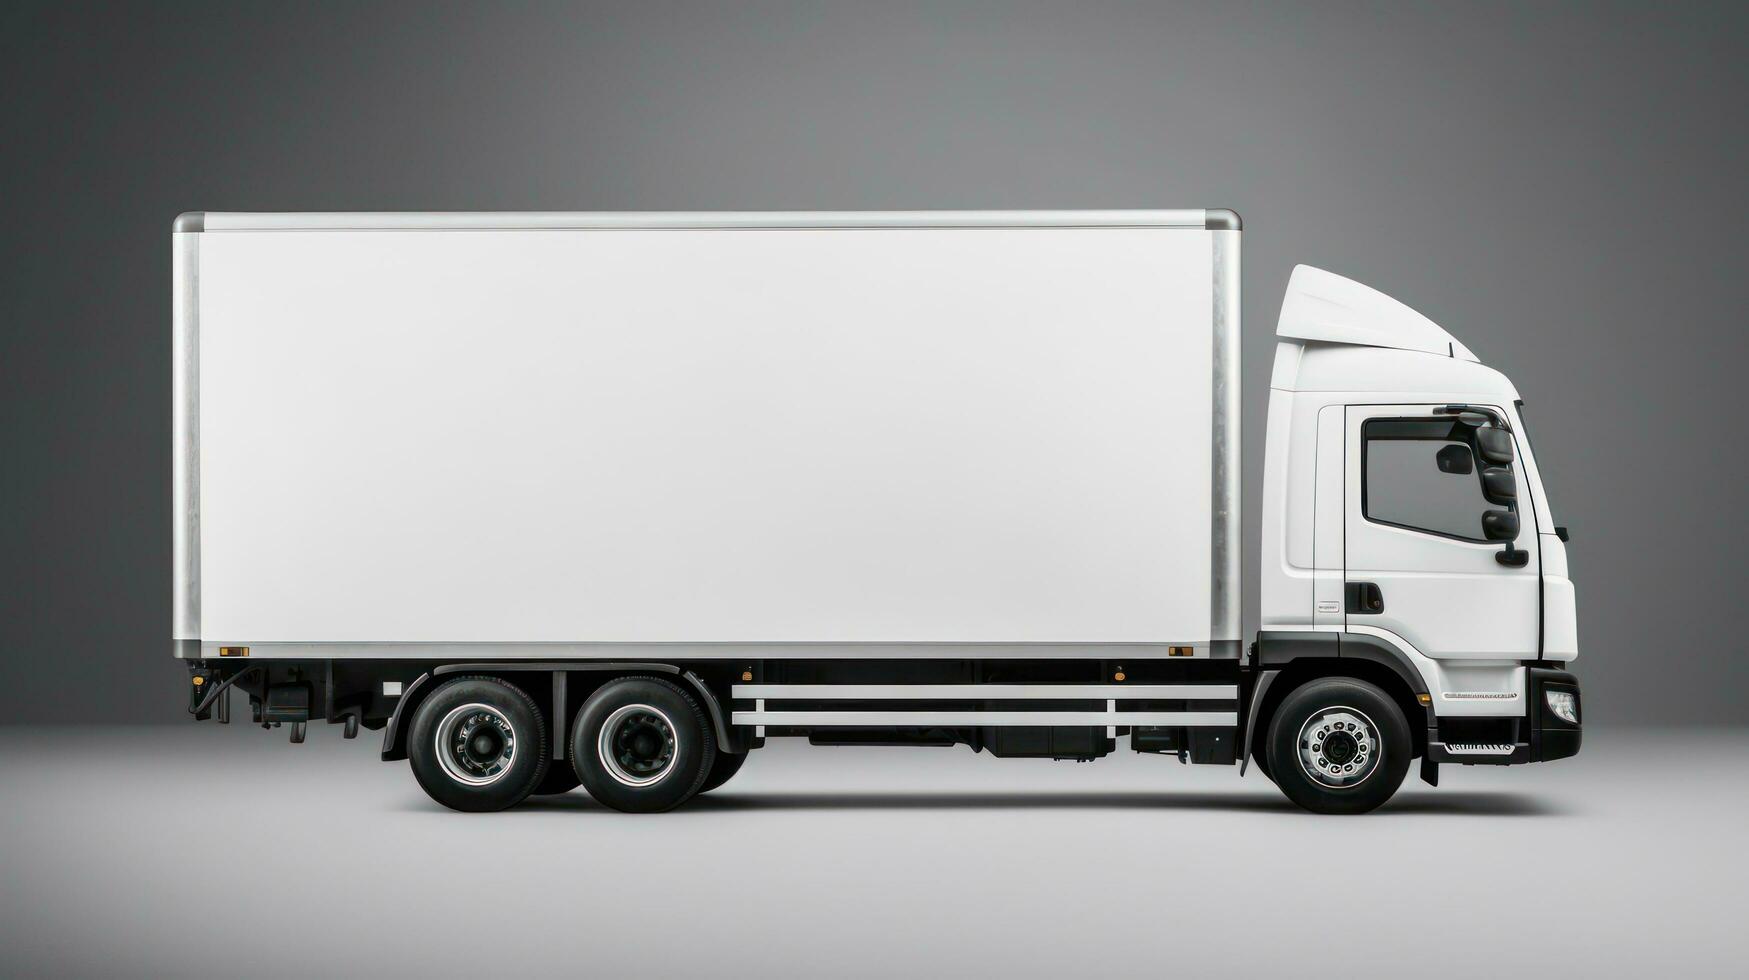 Mockup truck with a white body. side view. photo